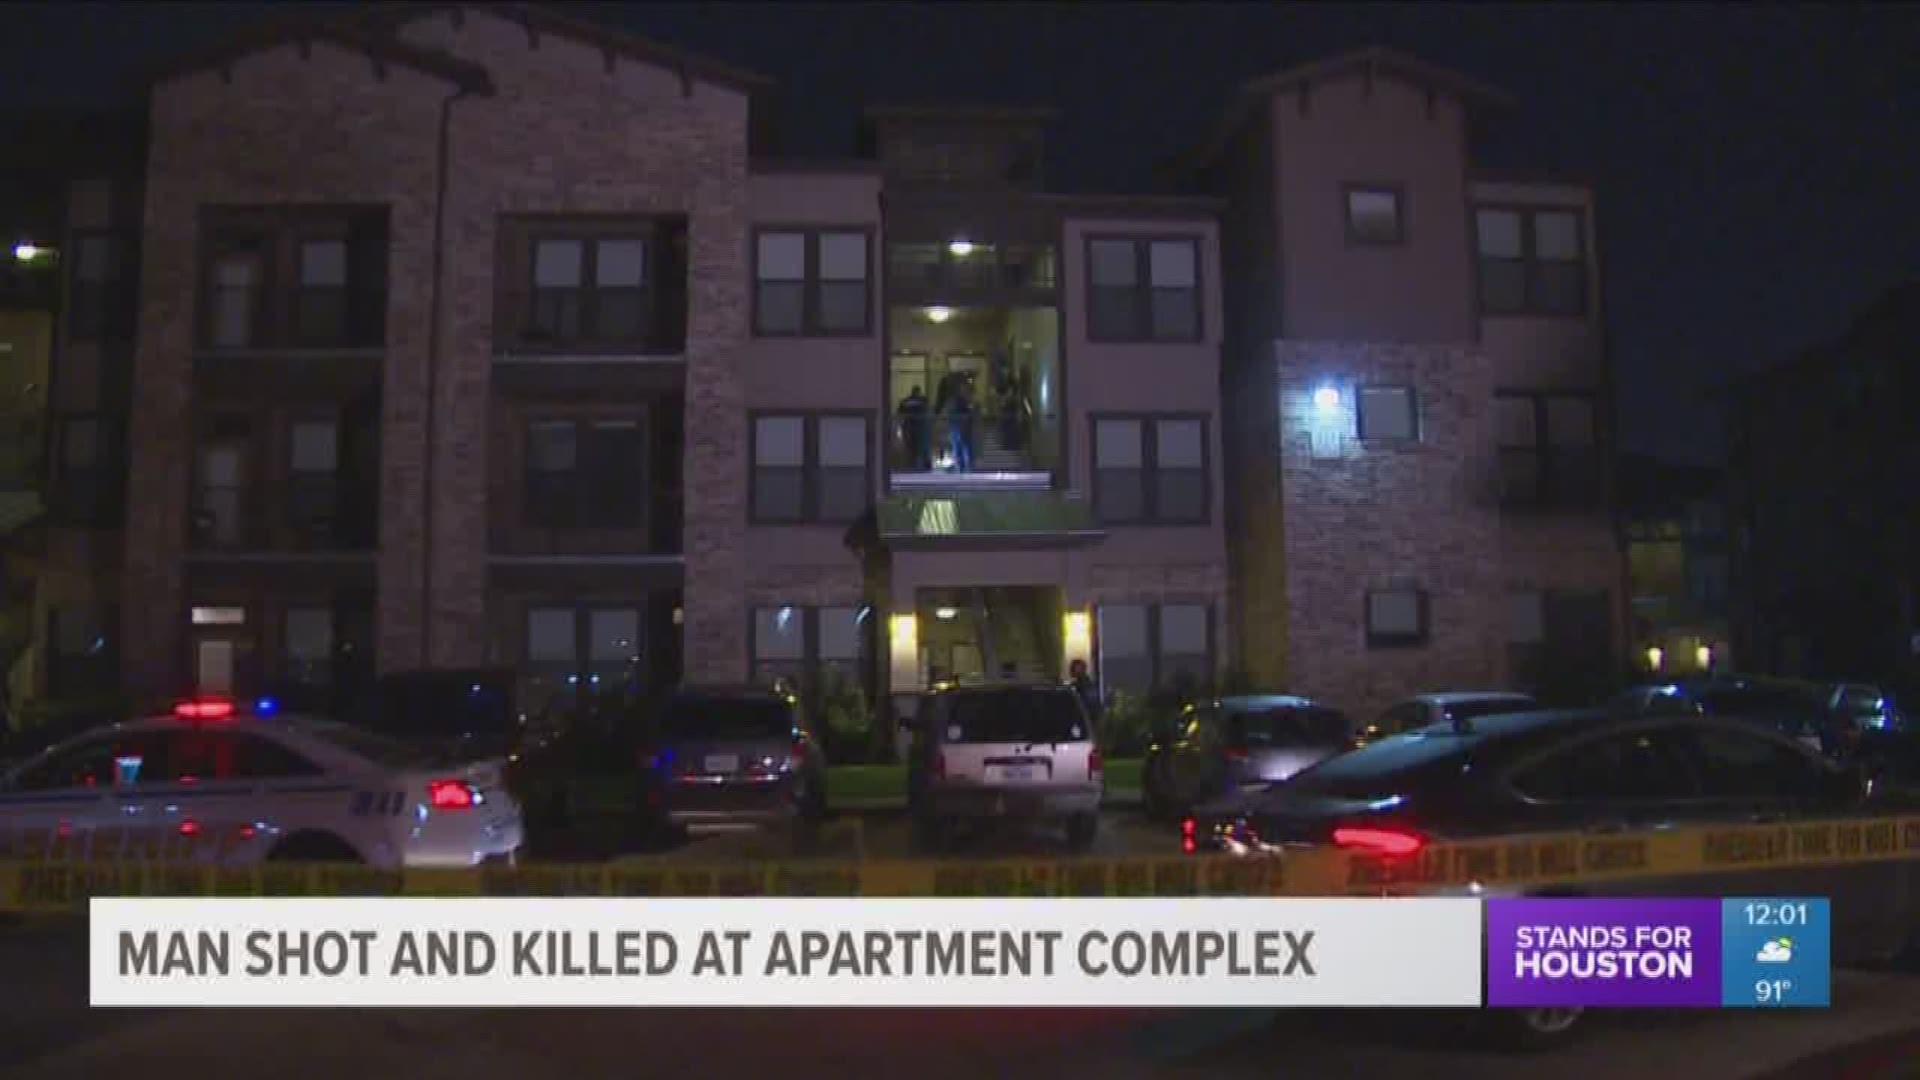 Investigators have identified the man shot and killed overnight at an apartment complex in northwest Harris County as Frederick Kennedy.